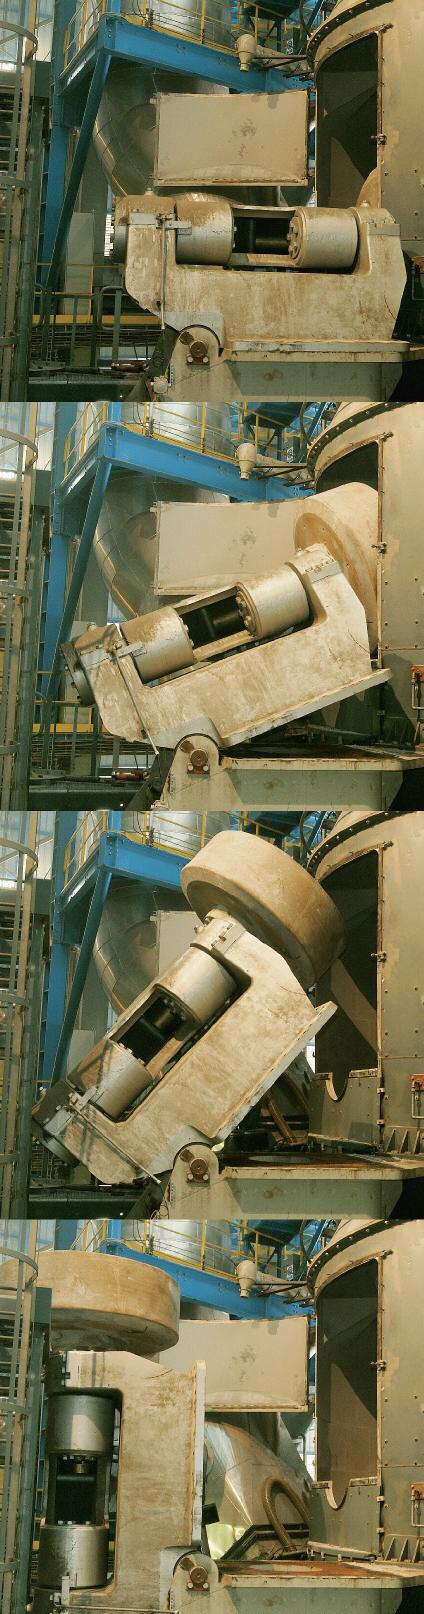 MVR roller swing-out system As with any roller mills, the wear parts of the grinding elements are exposed to the highest wear.